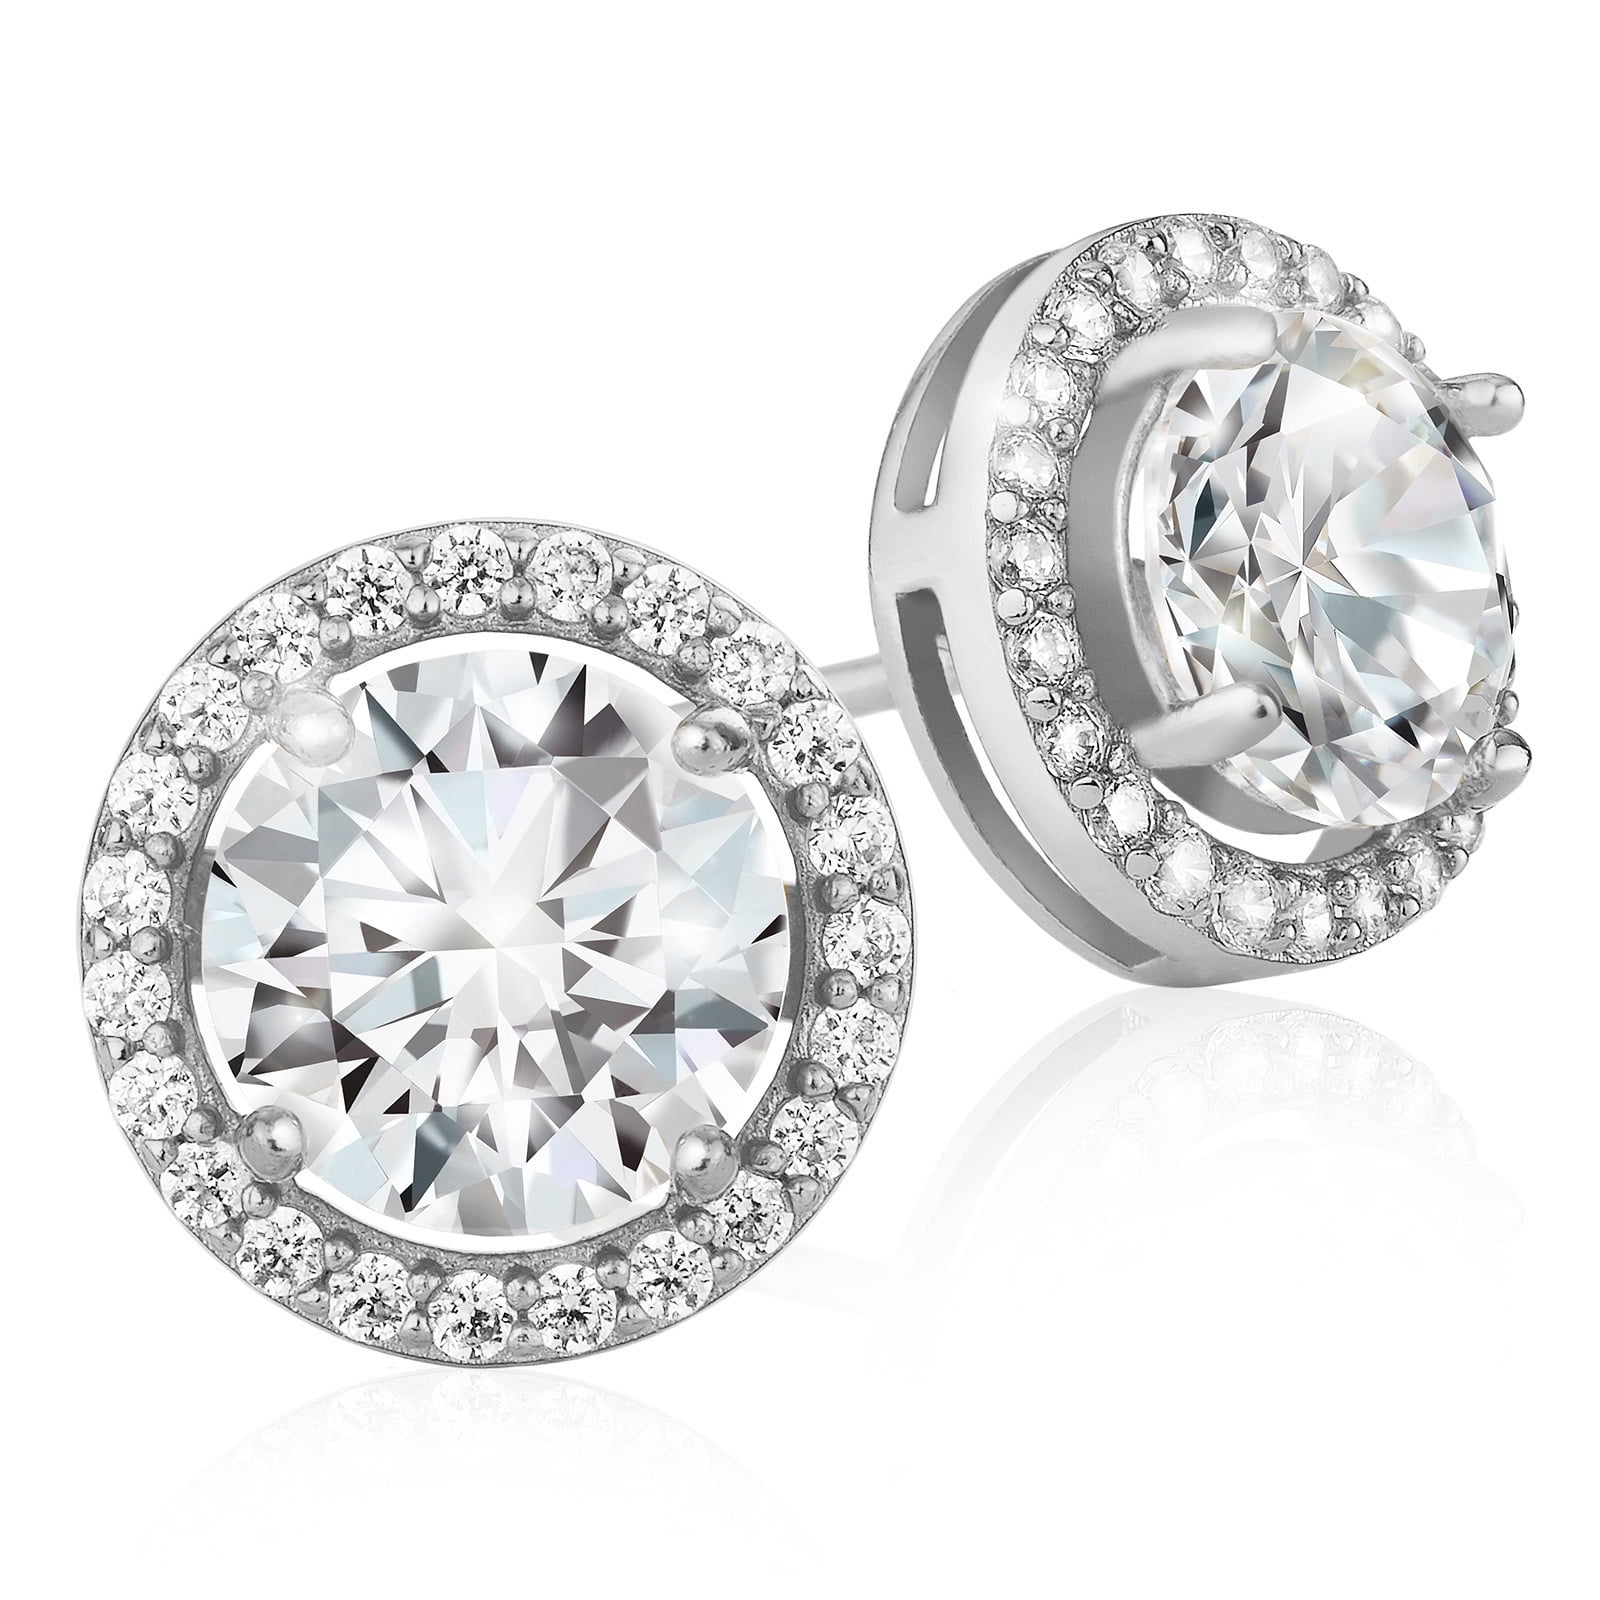 SPOIL CUPID 925 Sterling Silver Rhodium Plated AAA CZ Diamond Basket Prong Set Stud Earrings Size 3-6mm